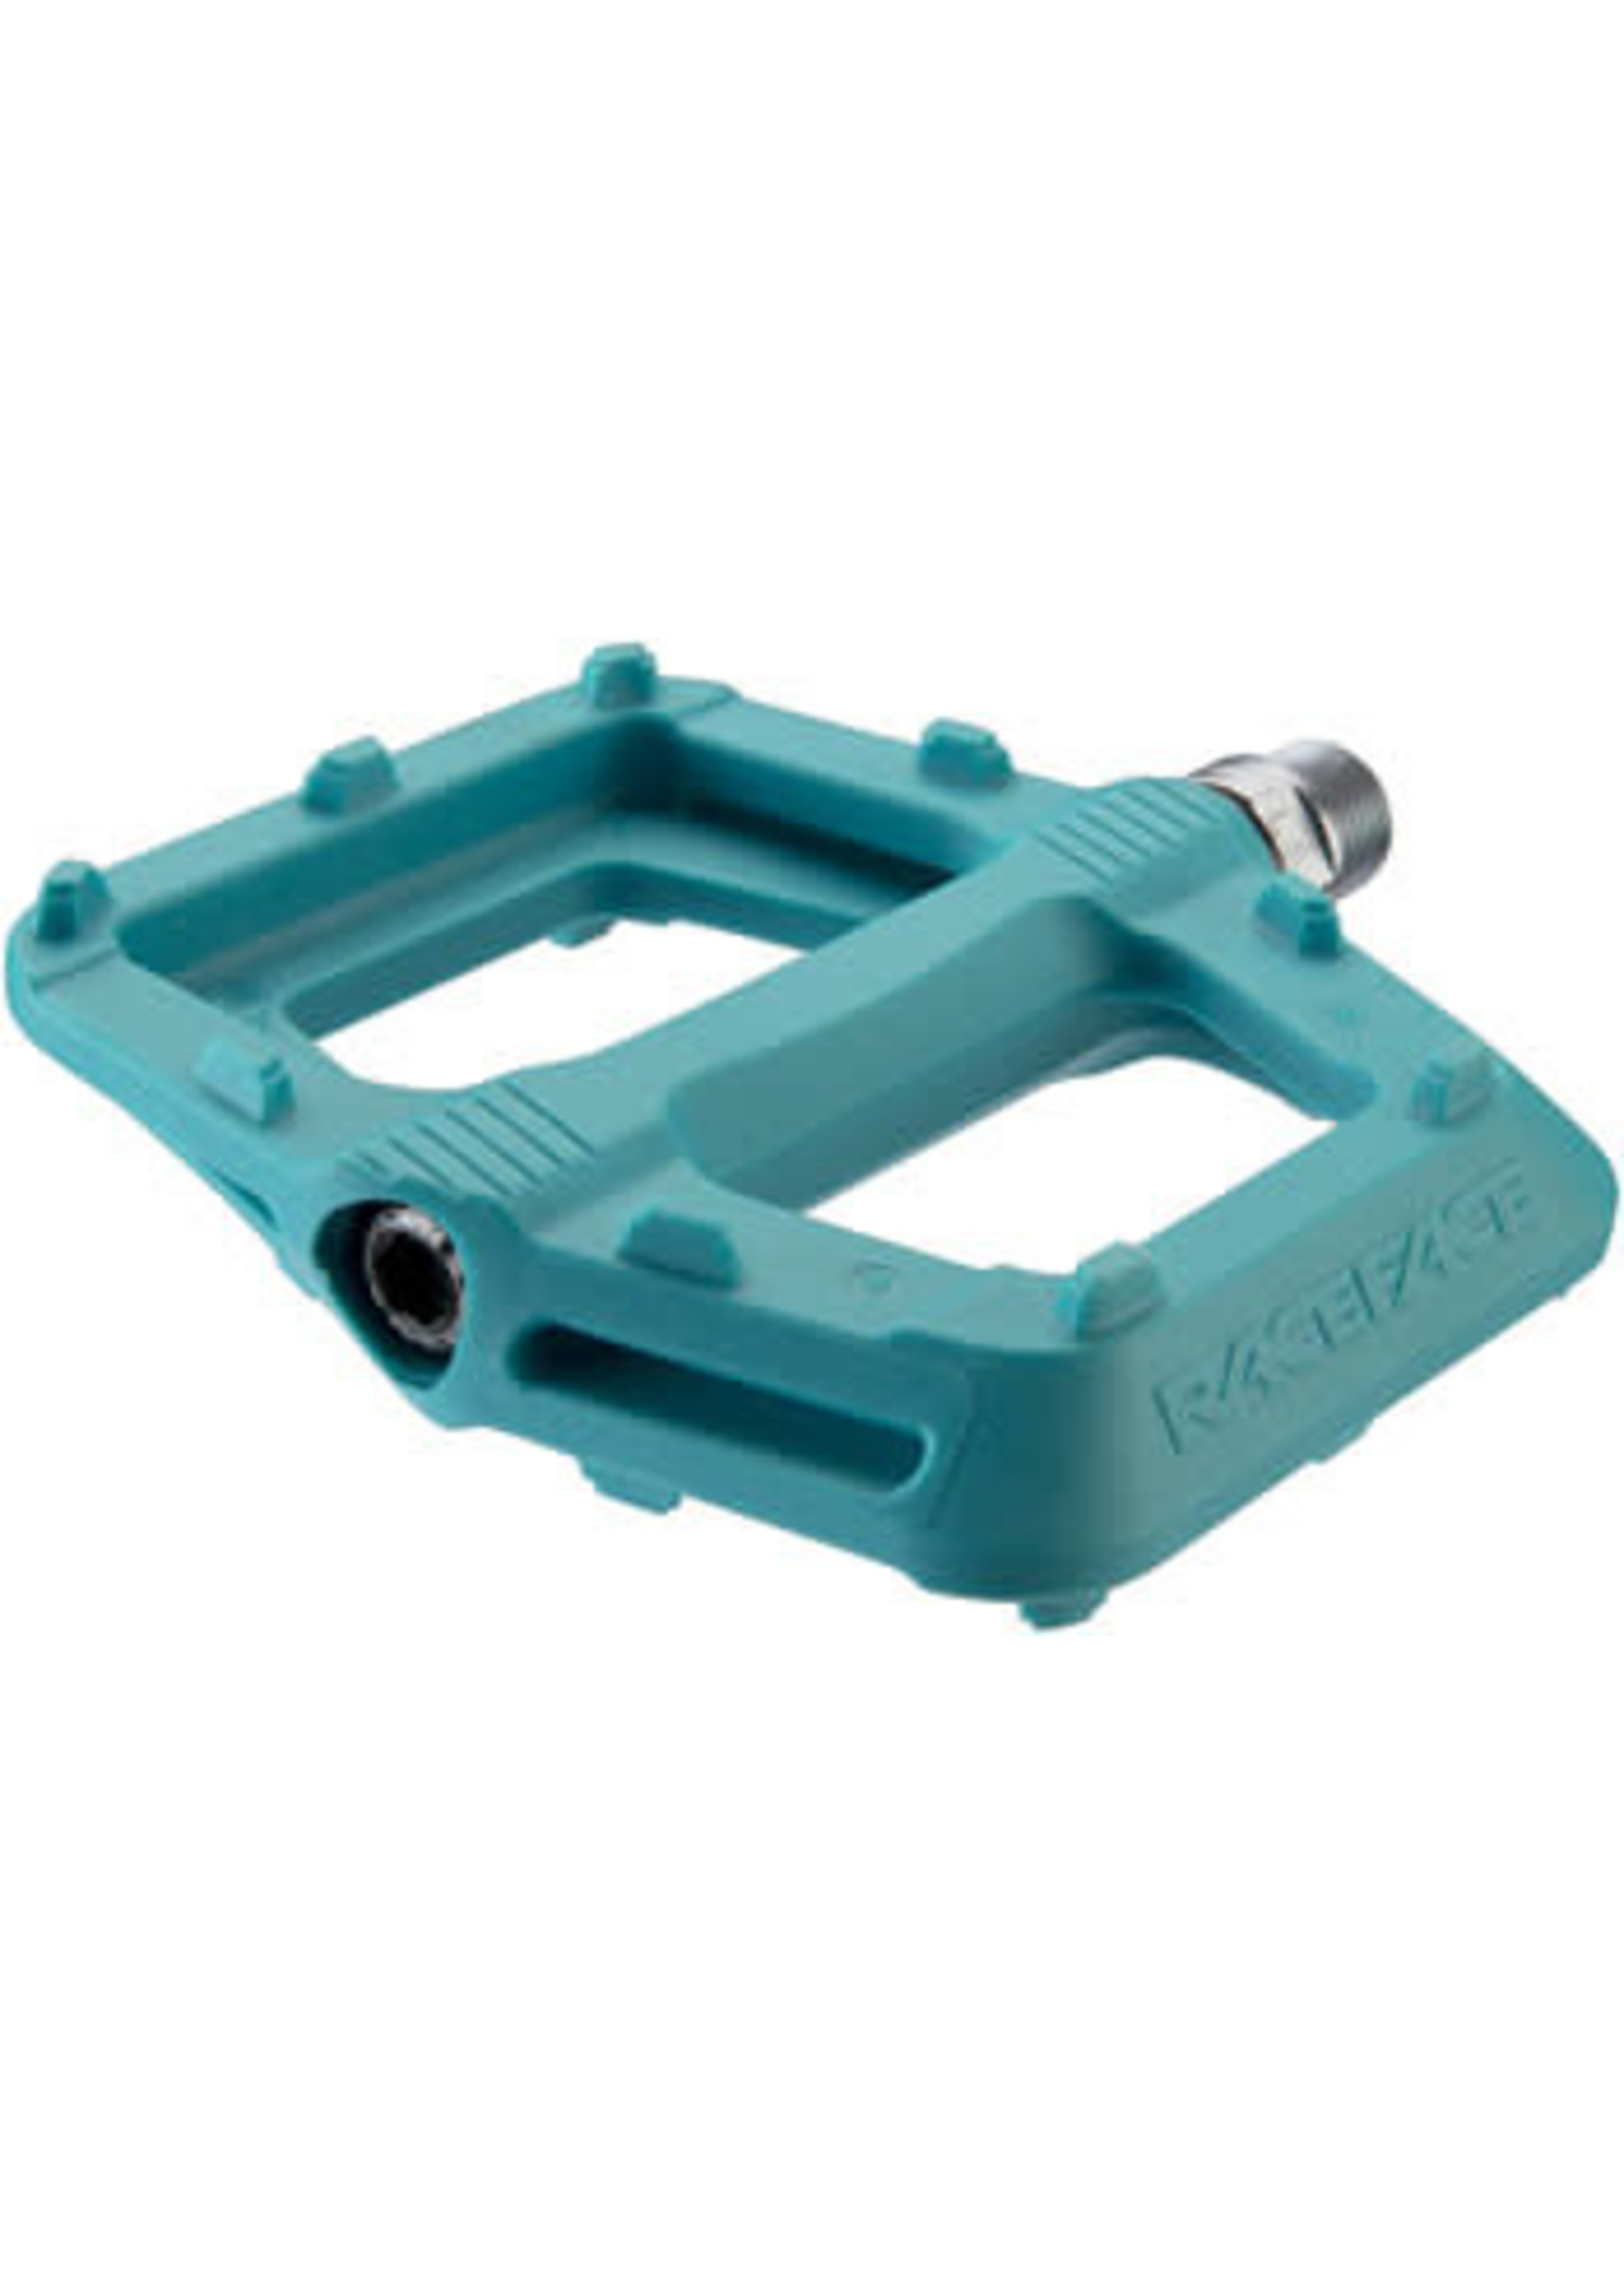 Raceface Ride, Platform Pedals, Body: Nylon, Spindle: Cr-Mo, 9/16'', Turquoise, Pair